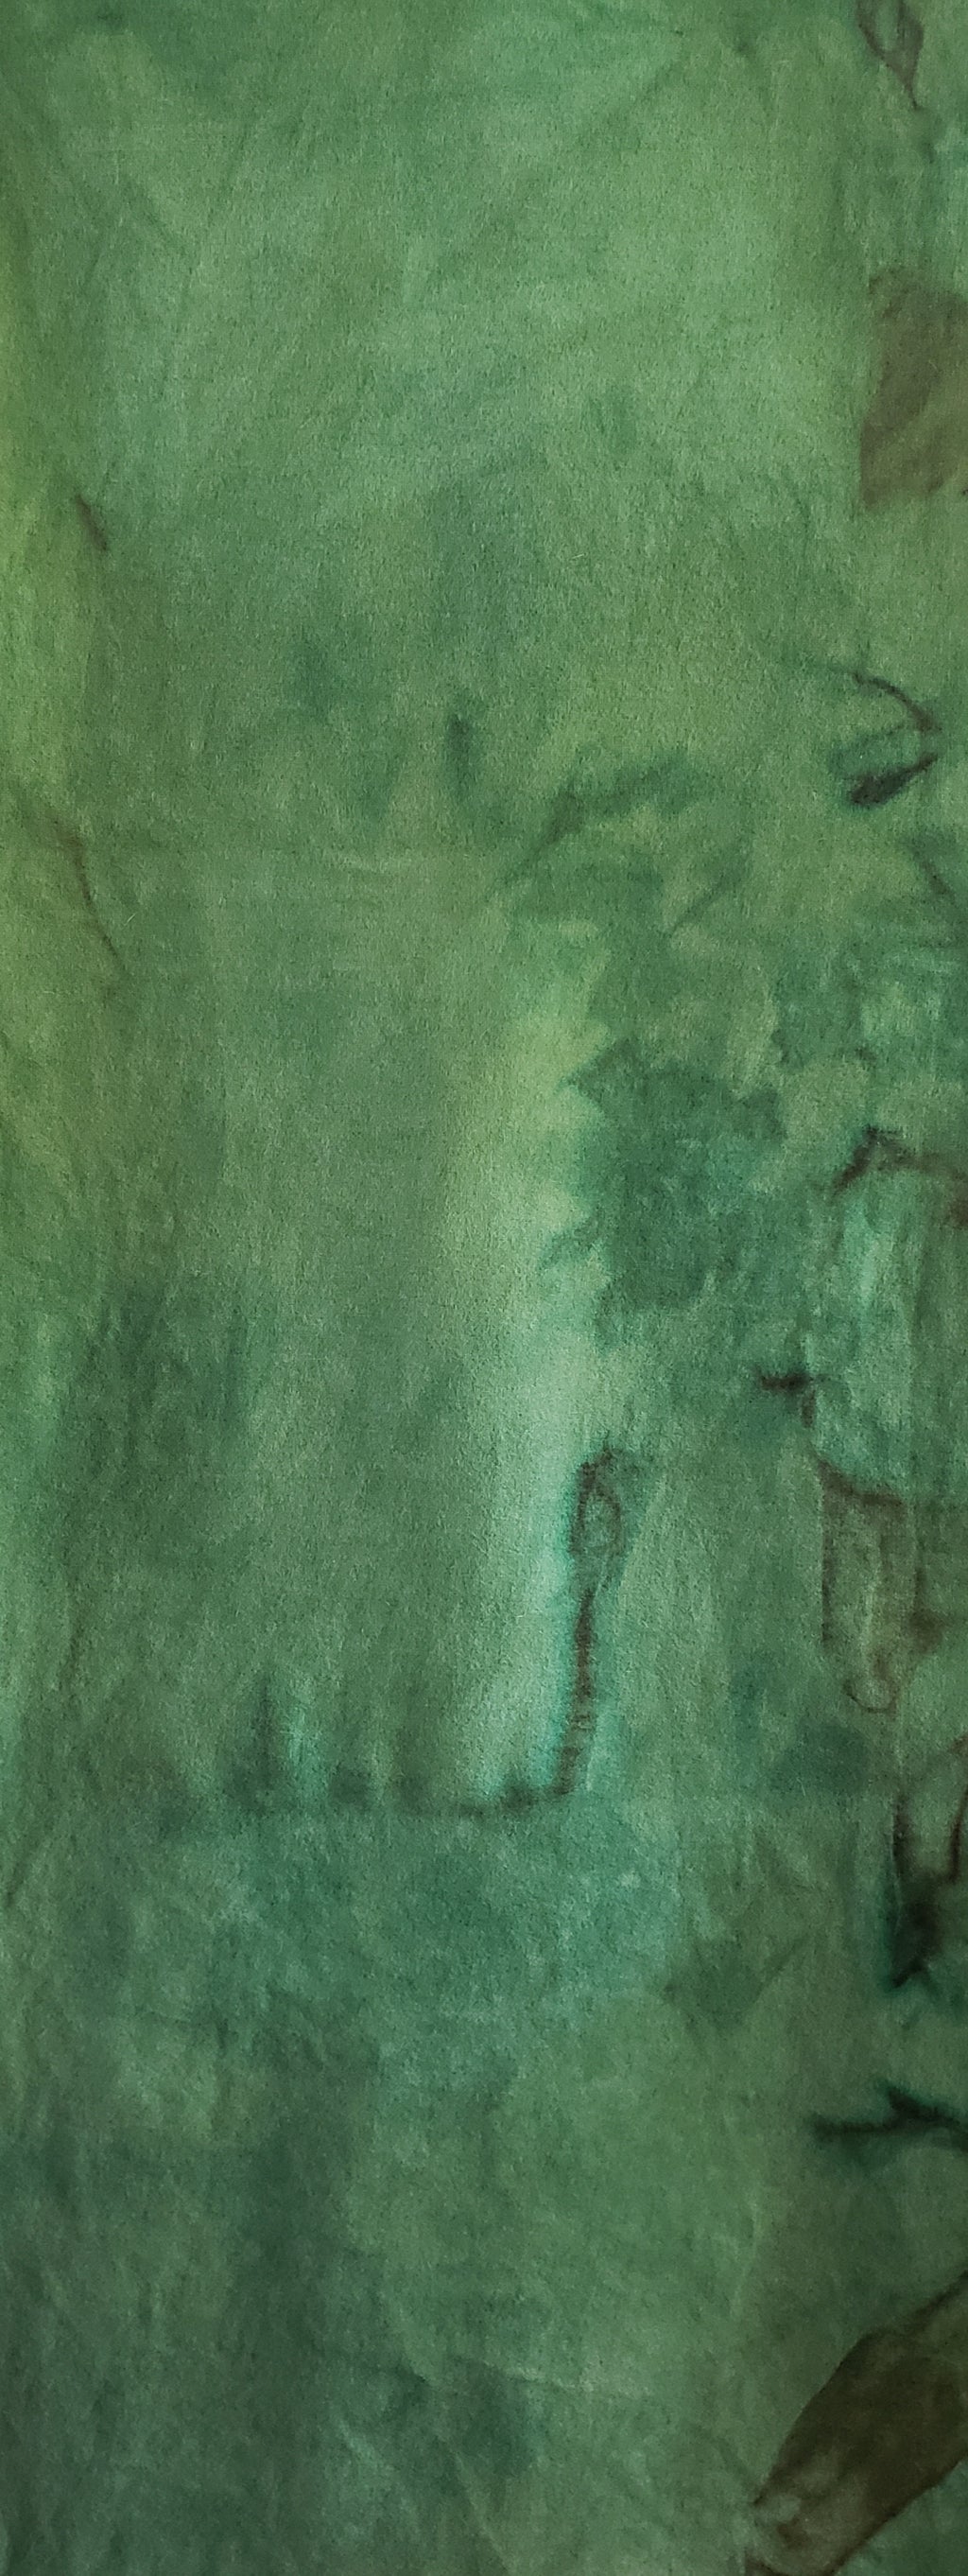 Hand Dyed Studio Cloth - BAYBERRY GREEN MEDIUM - Shades of Green - Wool Fabric for Rug Hooking and Wool Applique - RSS245